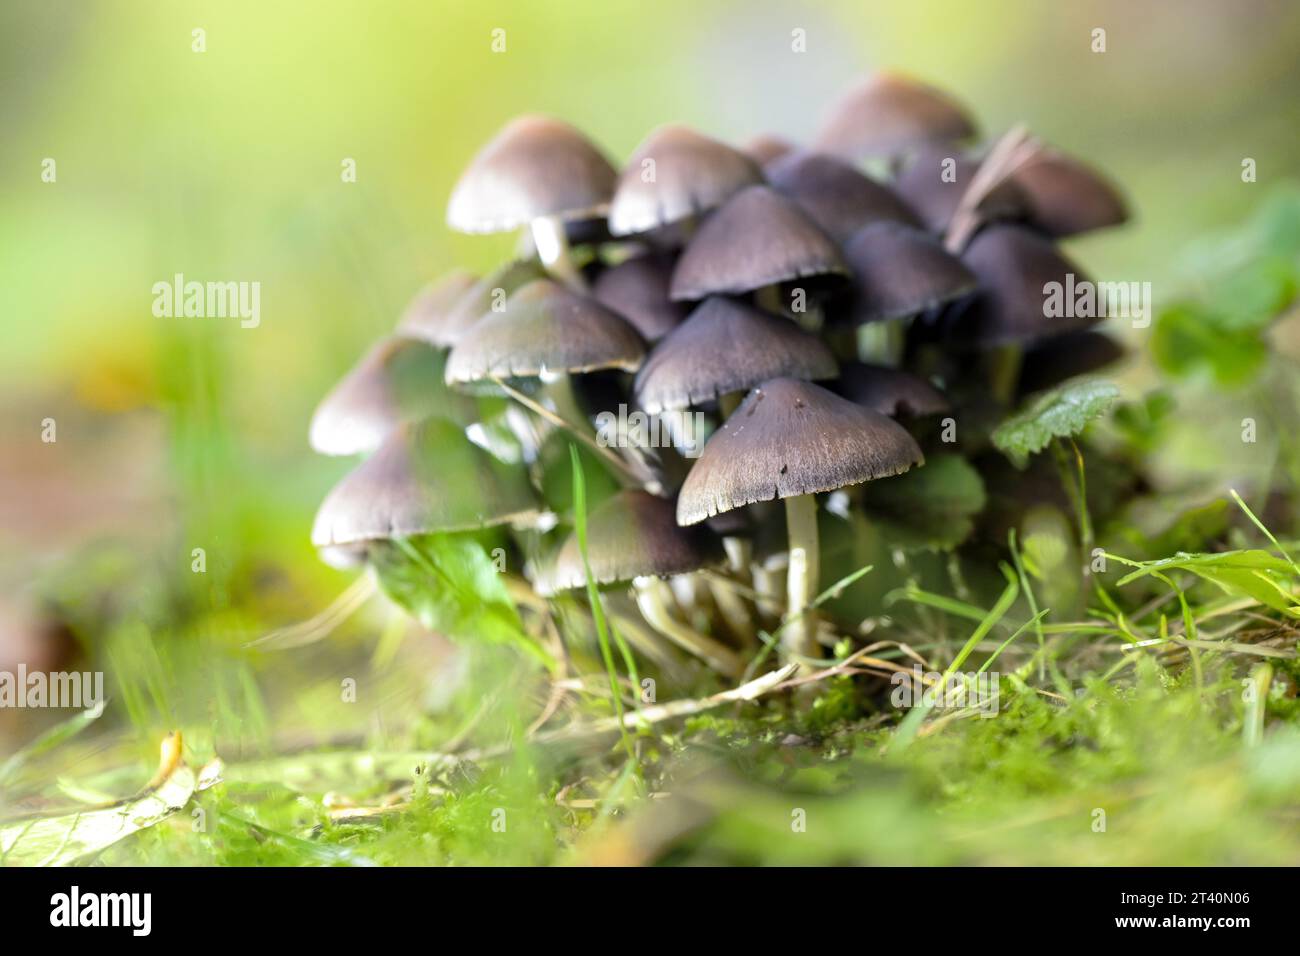 Group of fungi (probably Psathyrella pygmaea), mushrooms with brown caps and thin white hollow stems in green moss in a deciduous forest, copy space, Stock Photo